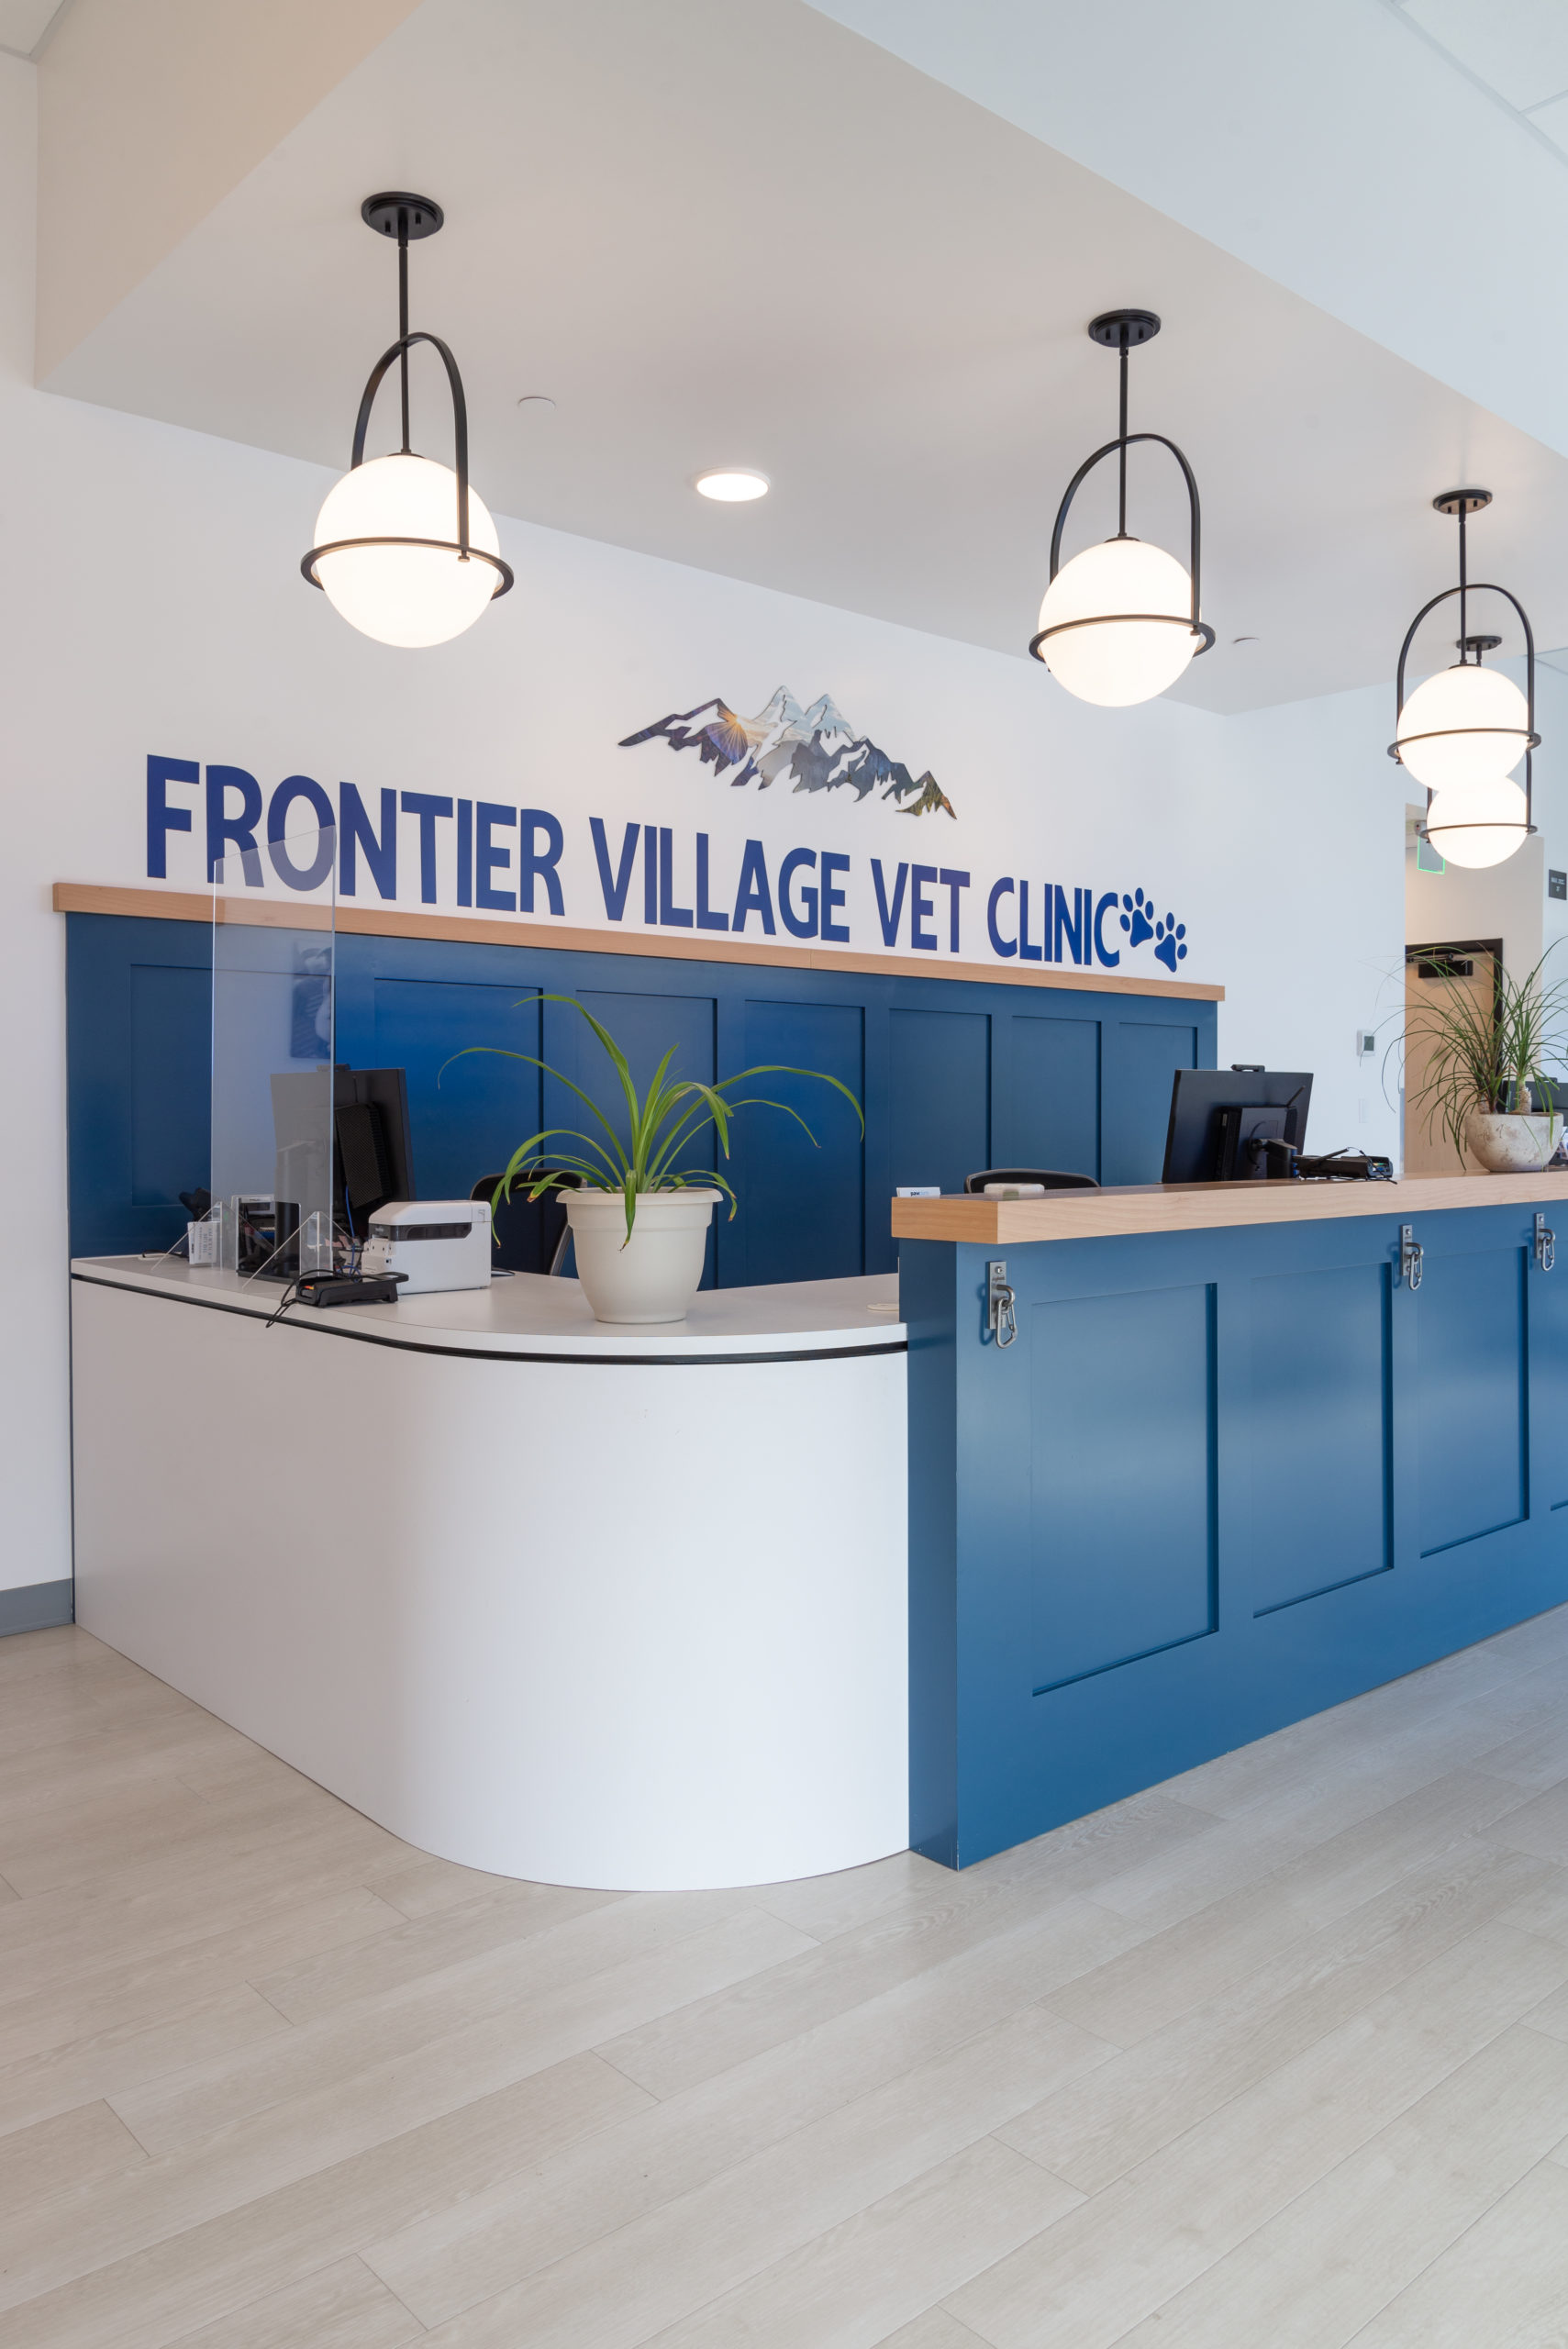 NVA’s Frontier Village Veterinary Clinic took the inspiration for the reception areas from the natural beauty of Lake Steven’s and the town’s historic turn of the century architecture